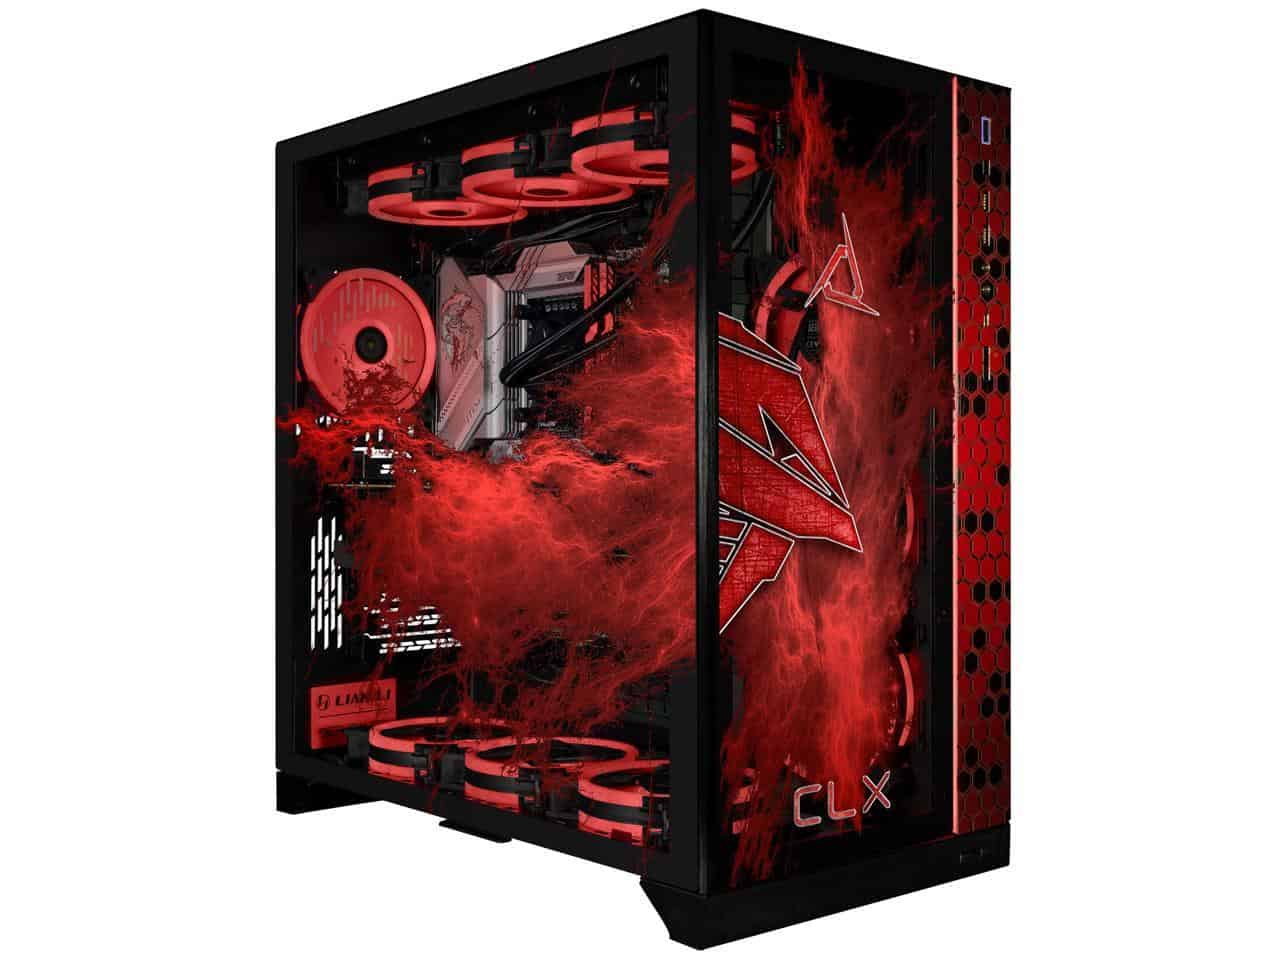 A red and black pc case with flames on it. Intel 14th gen prebuilt gaming PC spotted on Newegg!